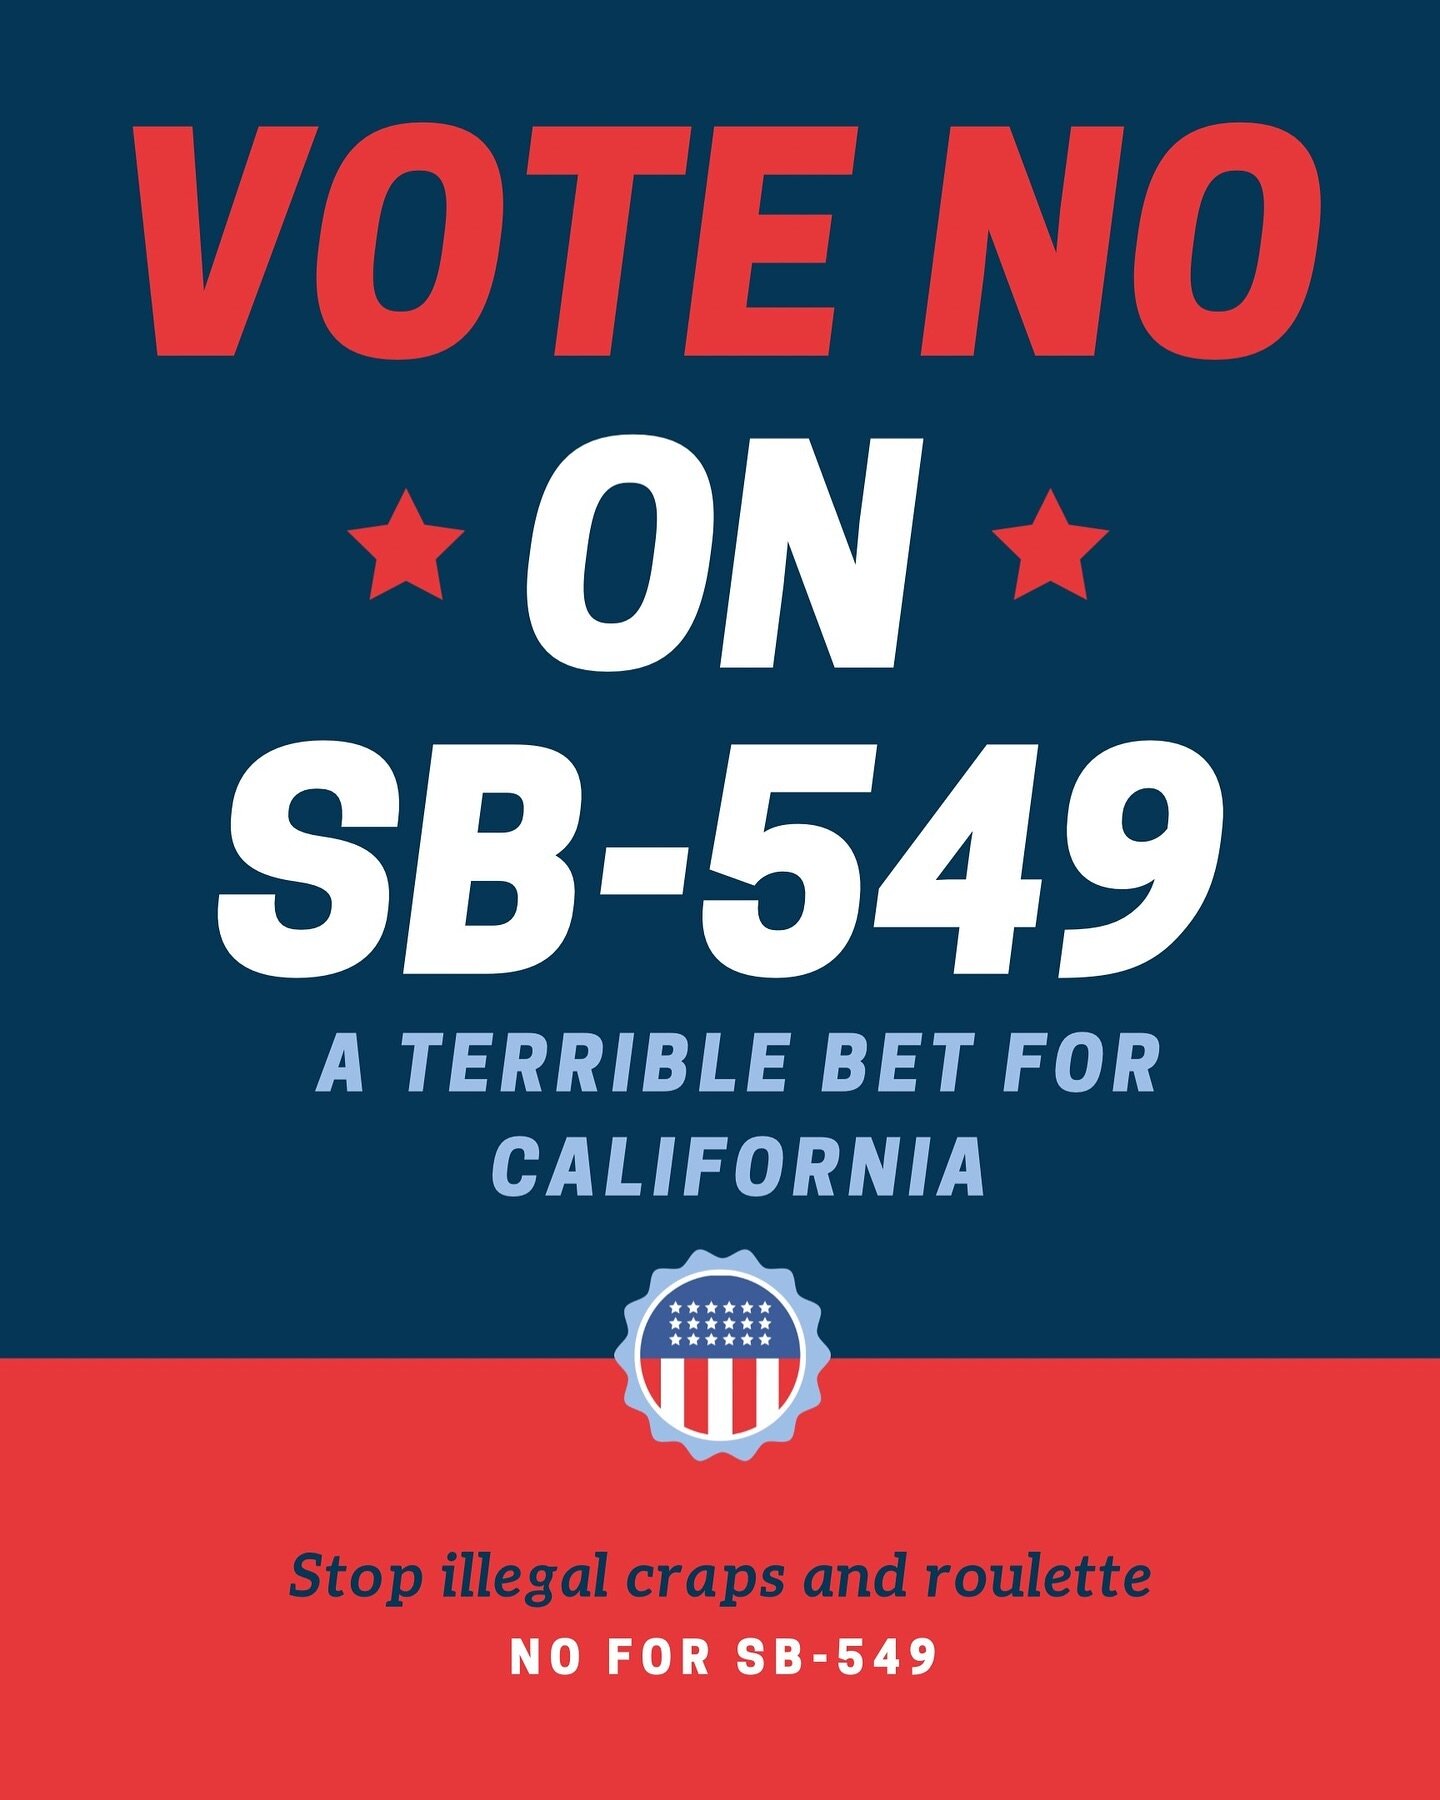 🎰 Say &lsquo;No On SB-549&rsquo; to protect our unique gaming paradise at Stars Casino. Let&rsquo;s stand together and keep the excitement alive! 💪🎲 #ProtectOurGaming #StarsCasinoTracy #NoOnSB549&rdquo;